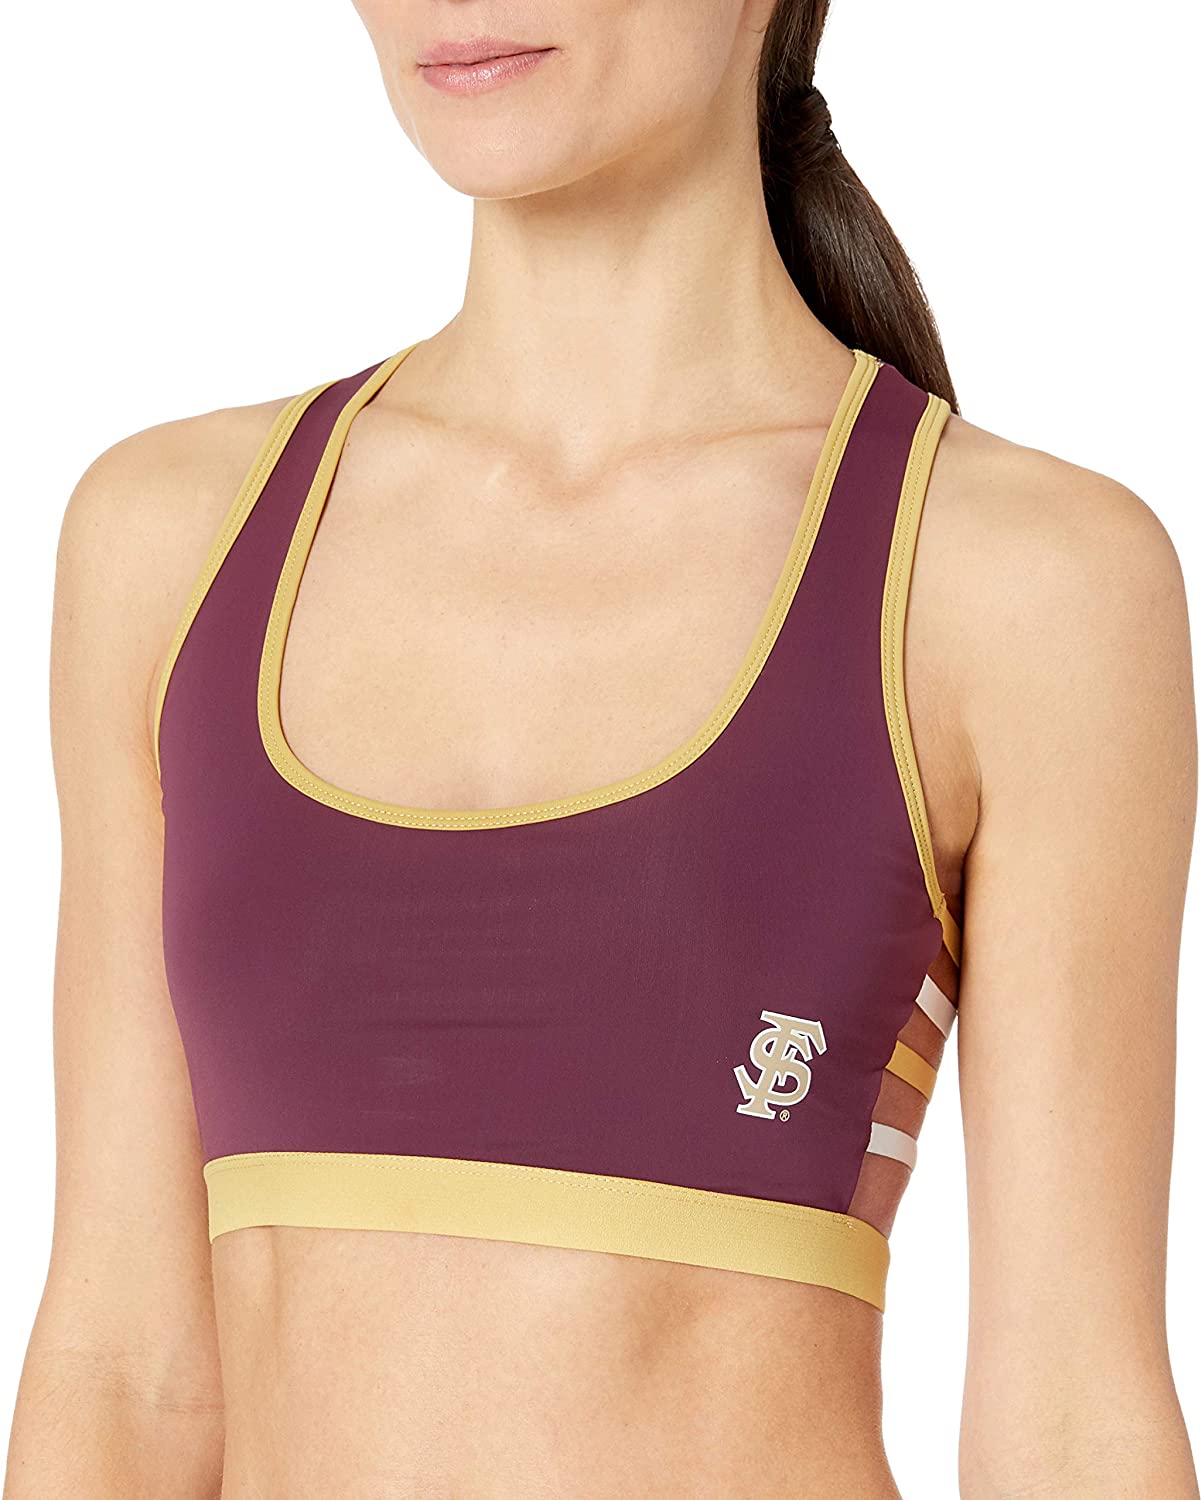 Price:$10.00 nuyu Women's Florida State University - Strappy Sports Top at Amazon Women’s Clothing store